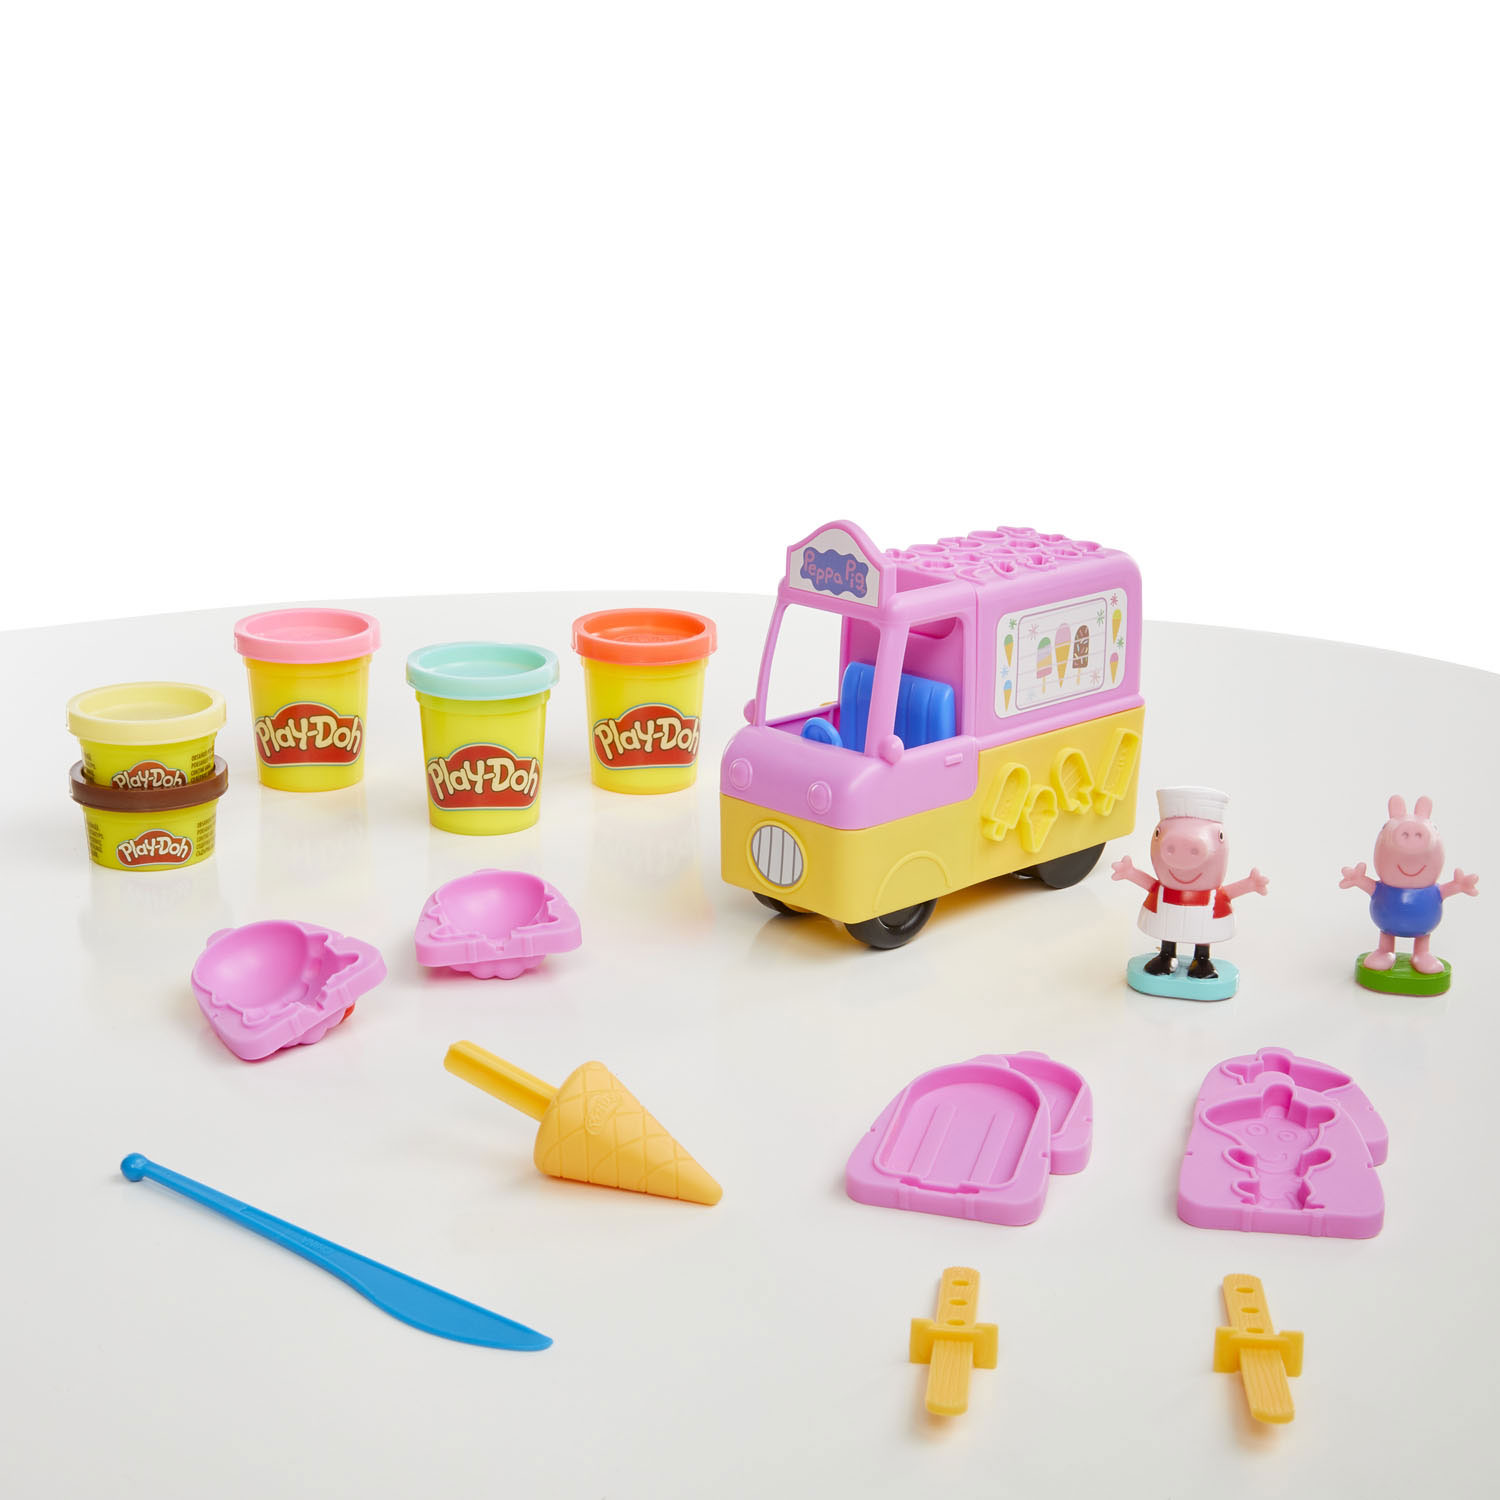 Play-Doh Mini Can Topper Toy